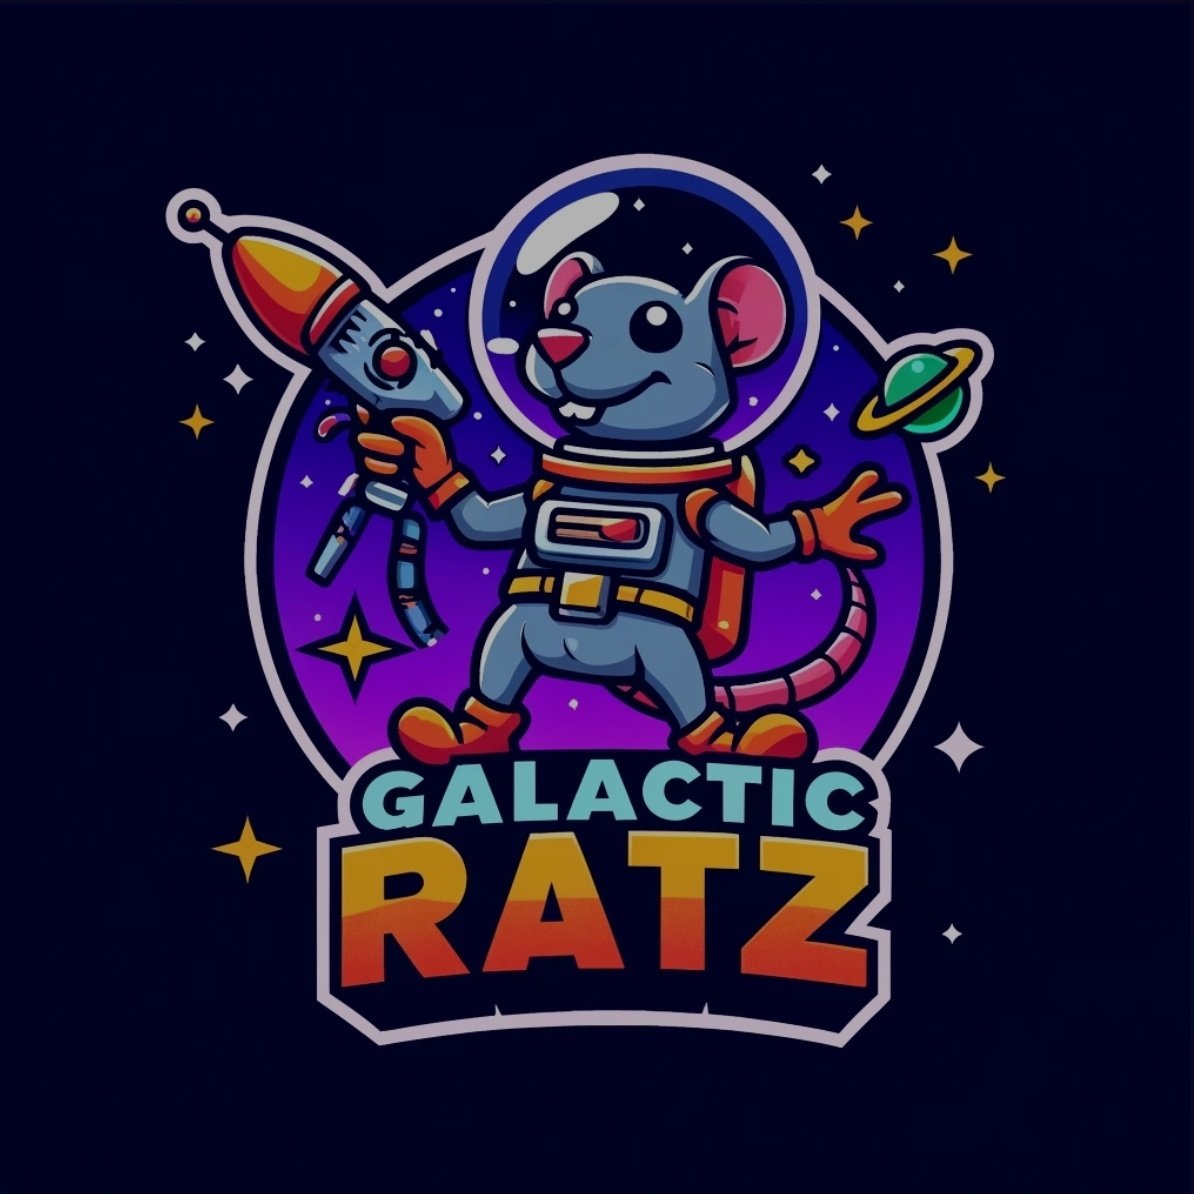 Galactic Ratz Meme token with a future for fun P2E gaming. SAFU Stealth lauch coming without notice. We're exploring the universe for other space ratz. Follow the Galactic Ratz and don't miss out on a Meme Project with a future. $GRATZ #GalacticRatz #stealthlauch